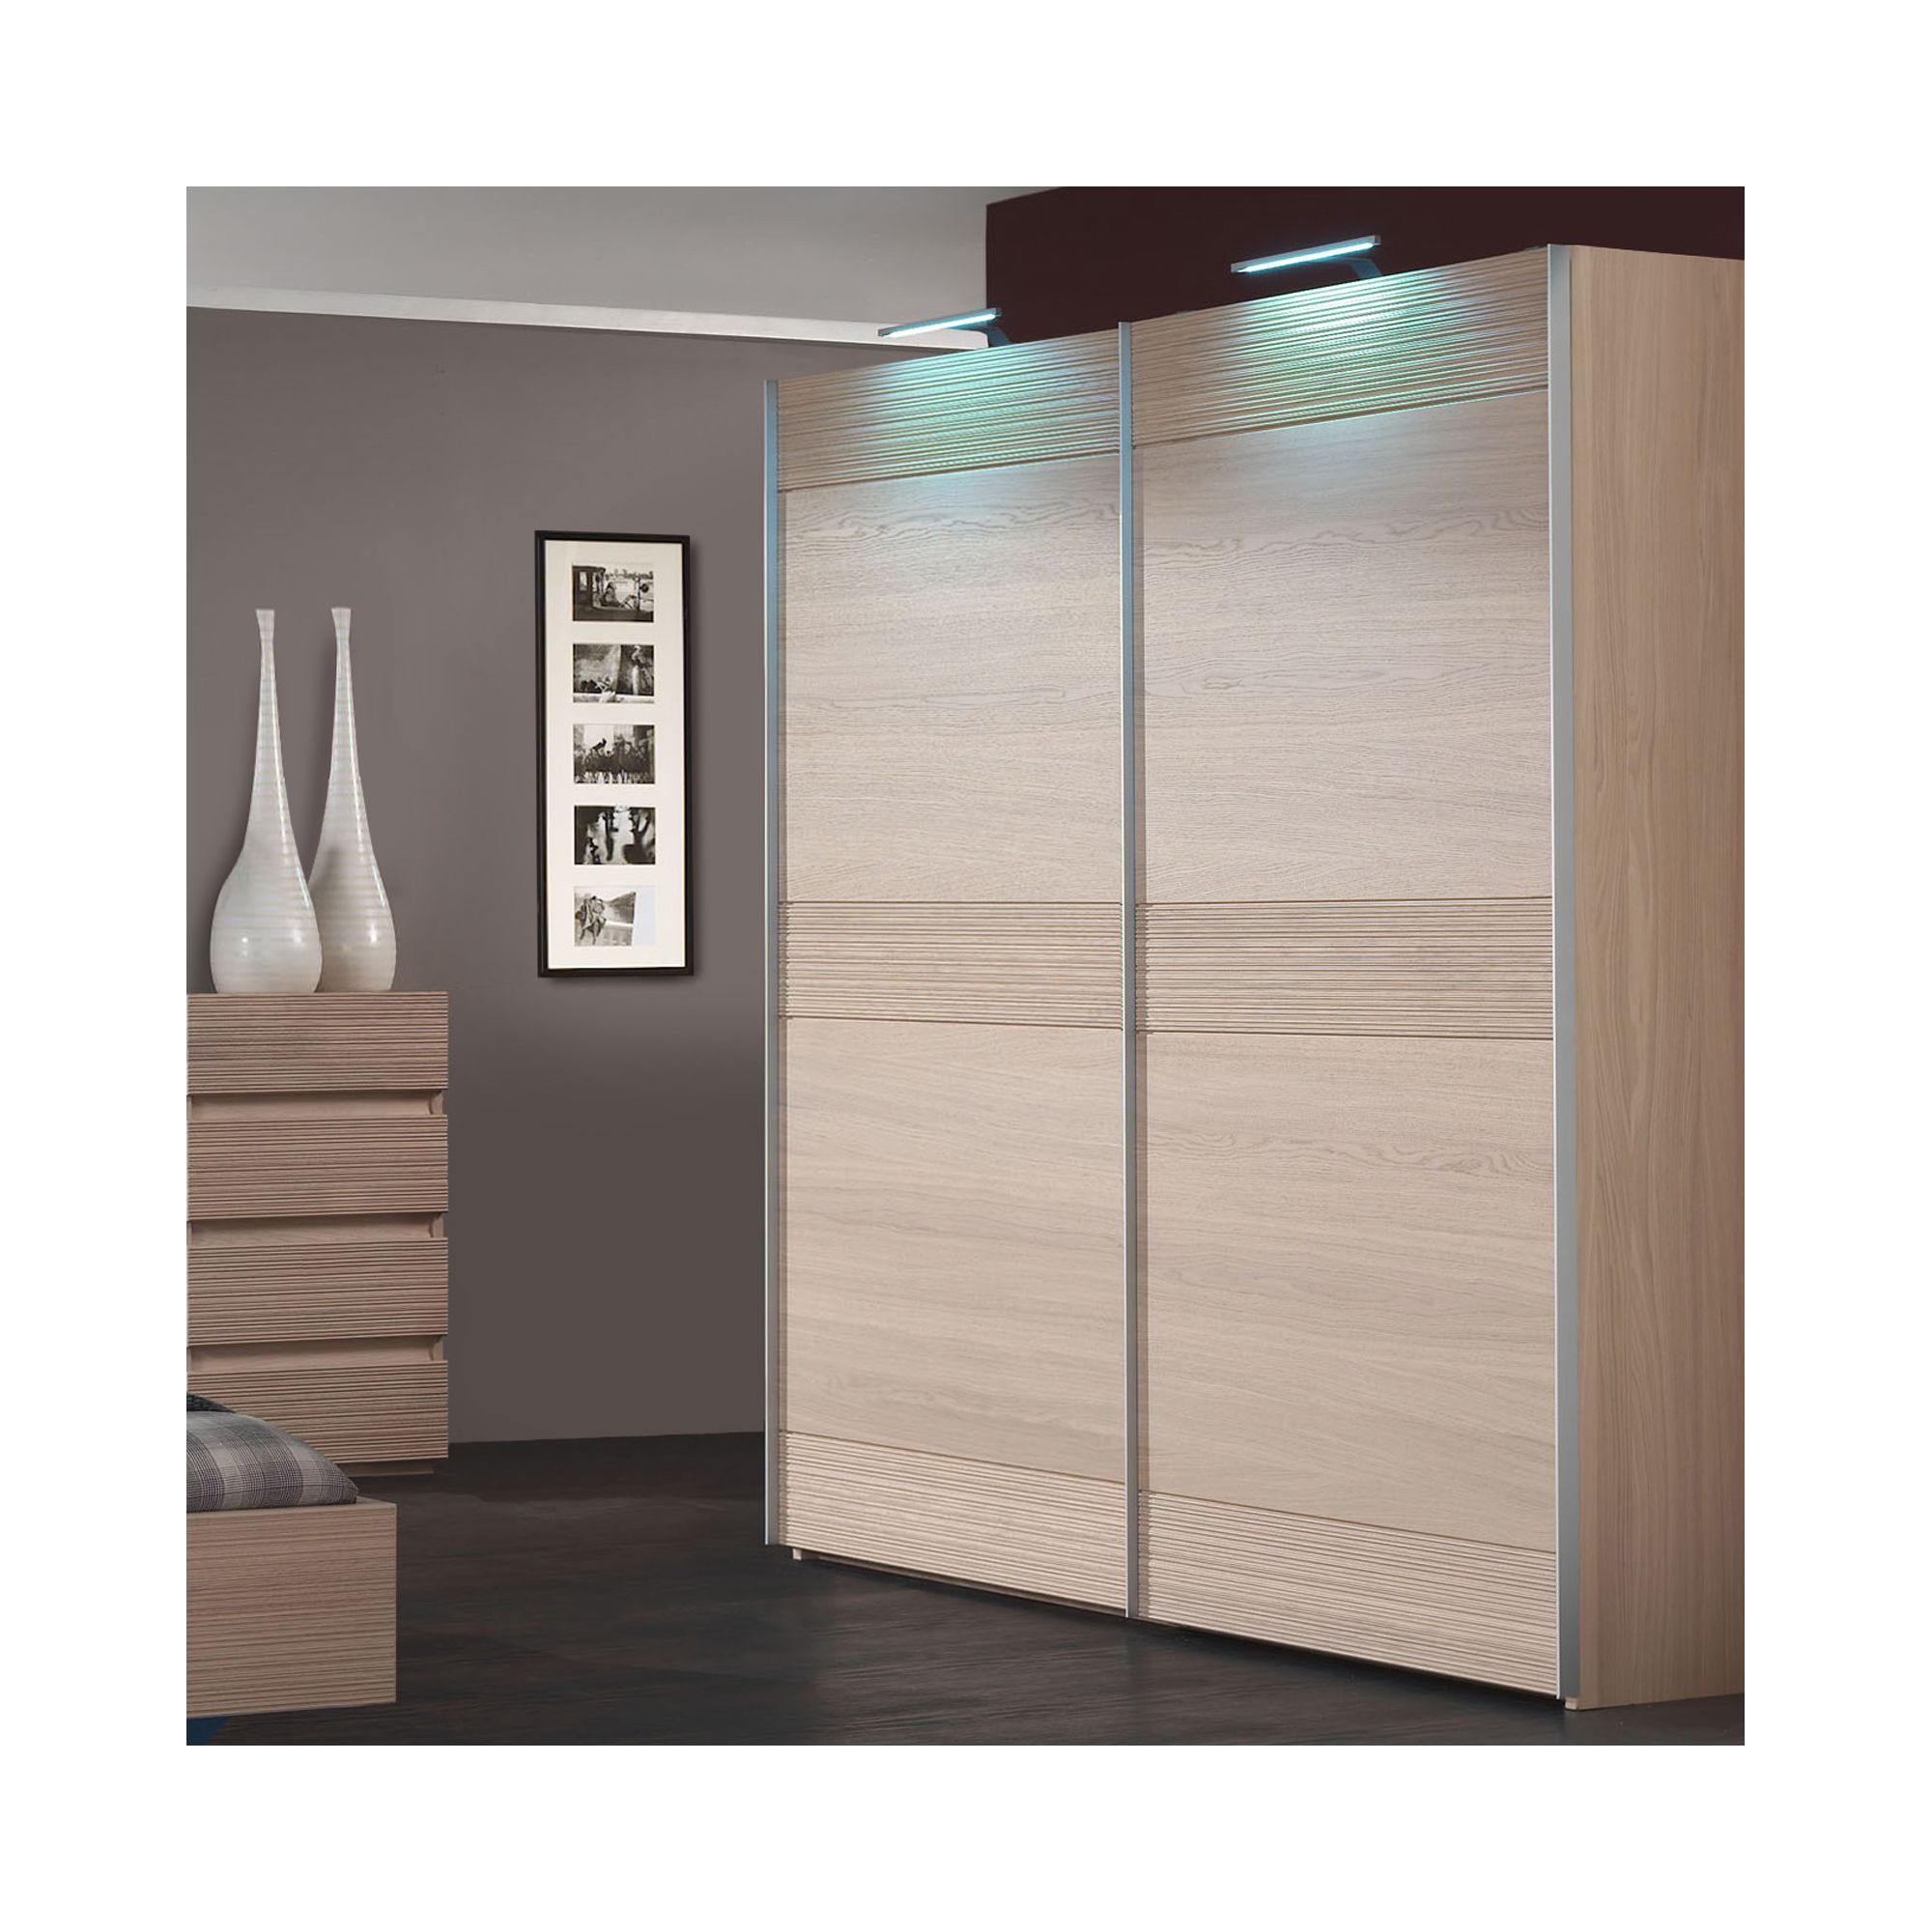 Sleepline Diva Wardrobe with 4 Shelves - 229cm - Grey Mat Lacquered - Without Mirror at Tesco Direct